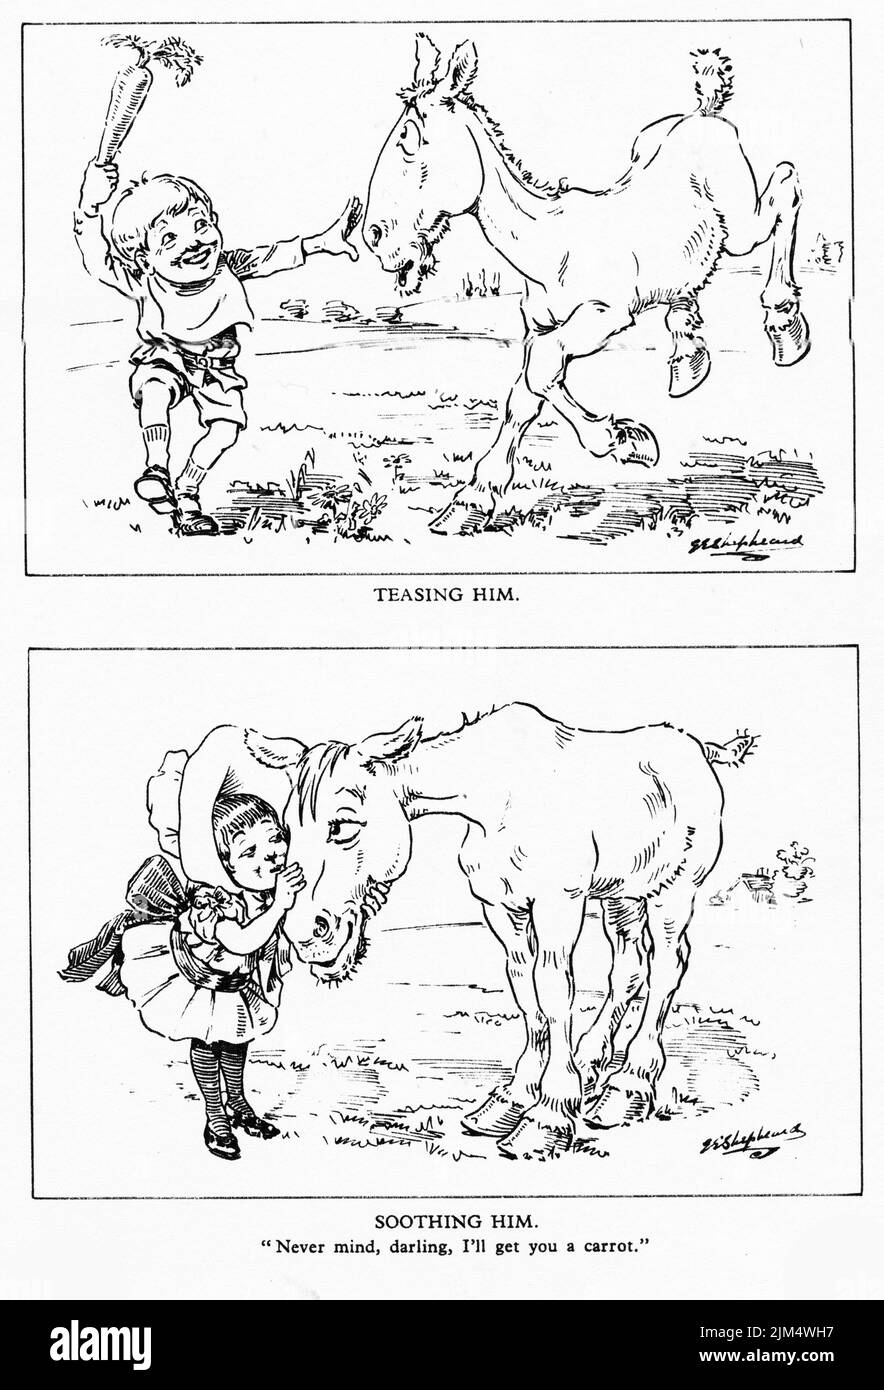 Cartoon style illustration of two children treating a horse unkindly and then nicely Stock Photo